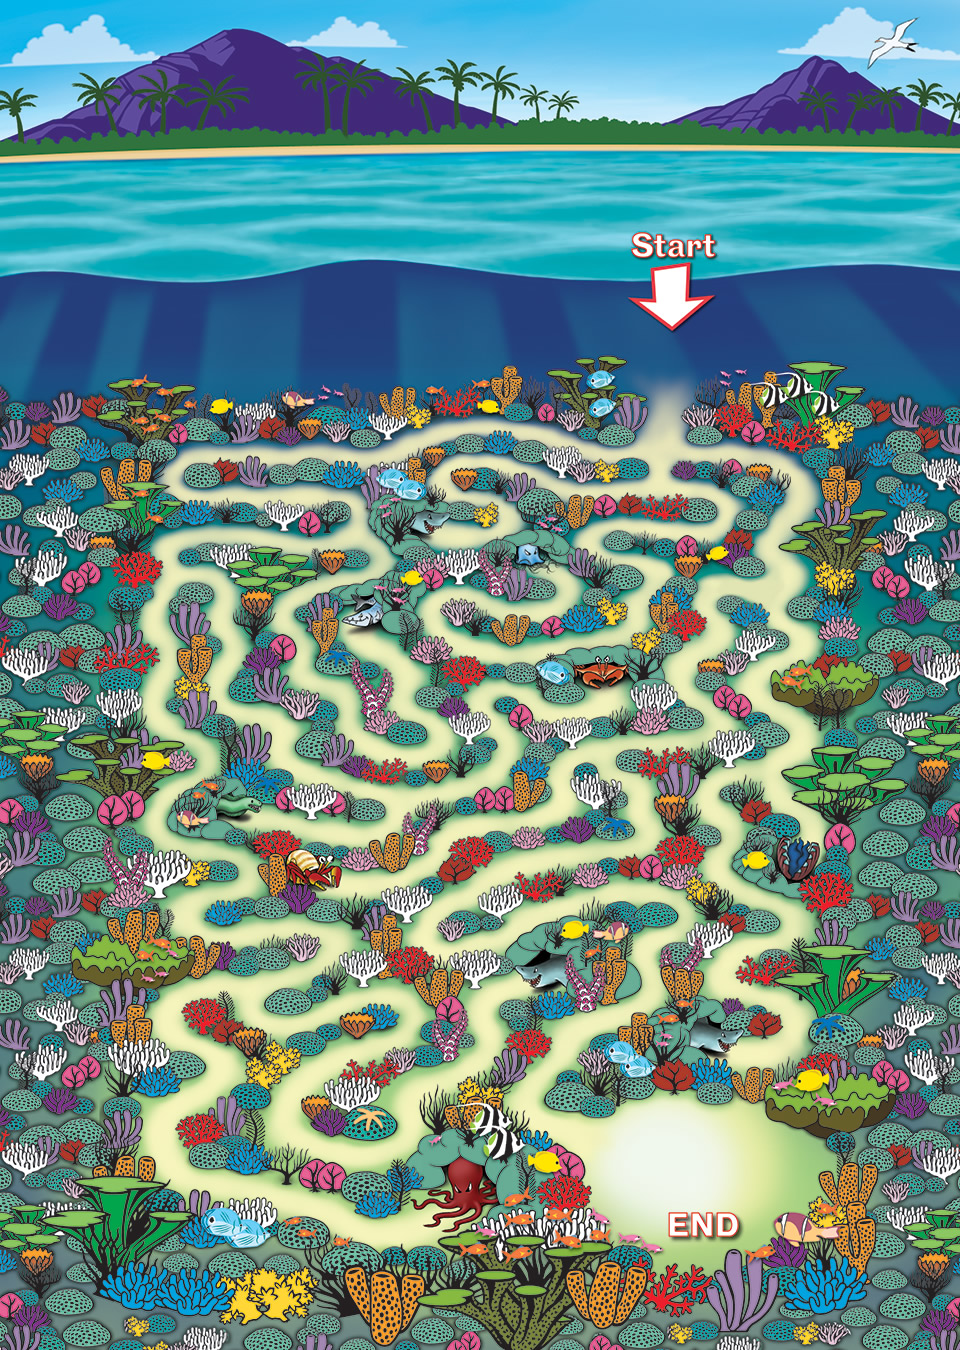 A puzzle/maze featuring a brightly colored coral reef illustration.